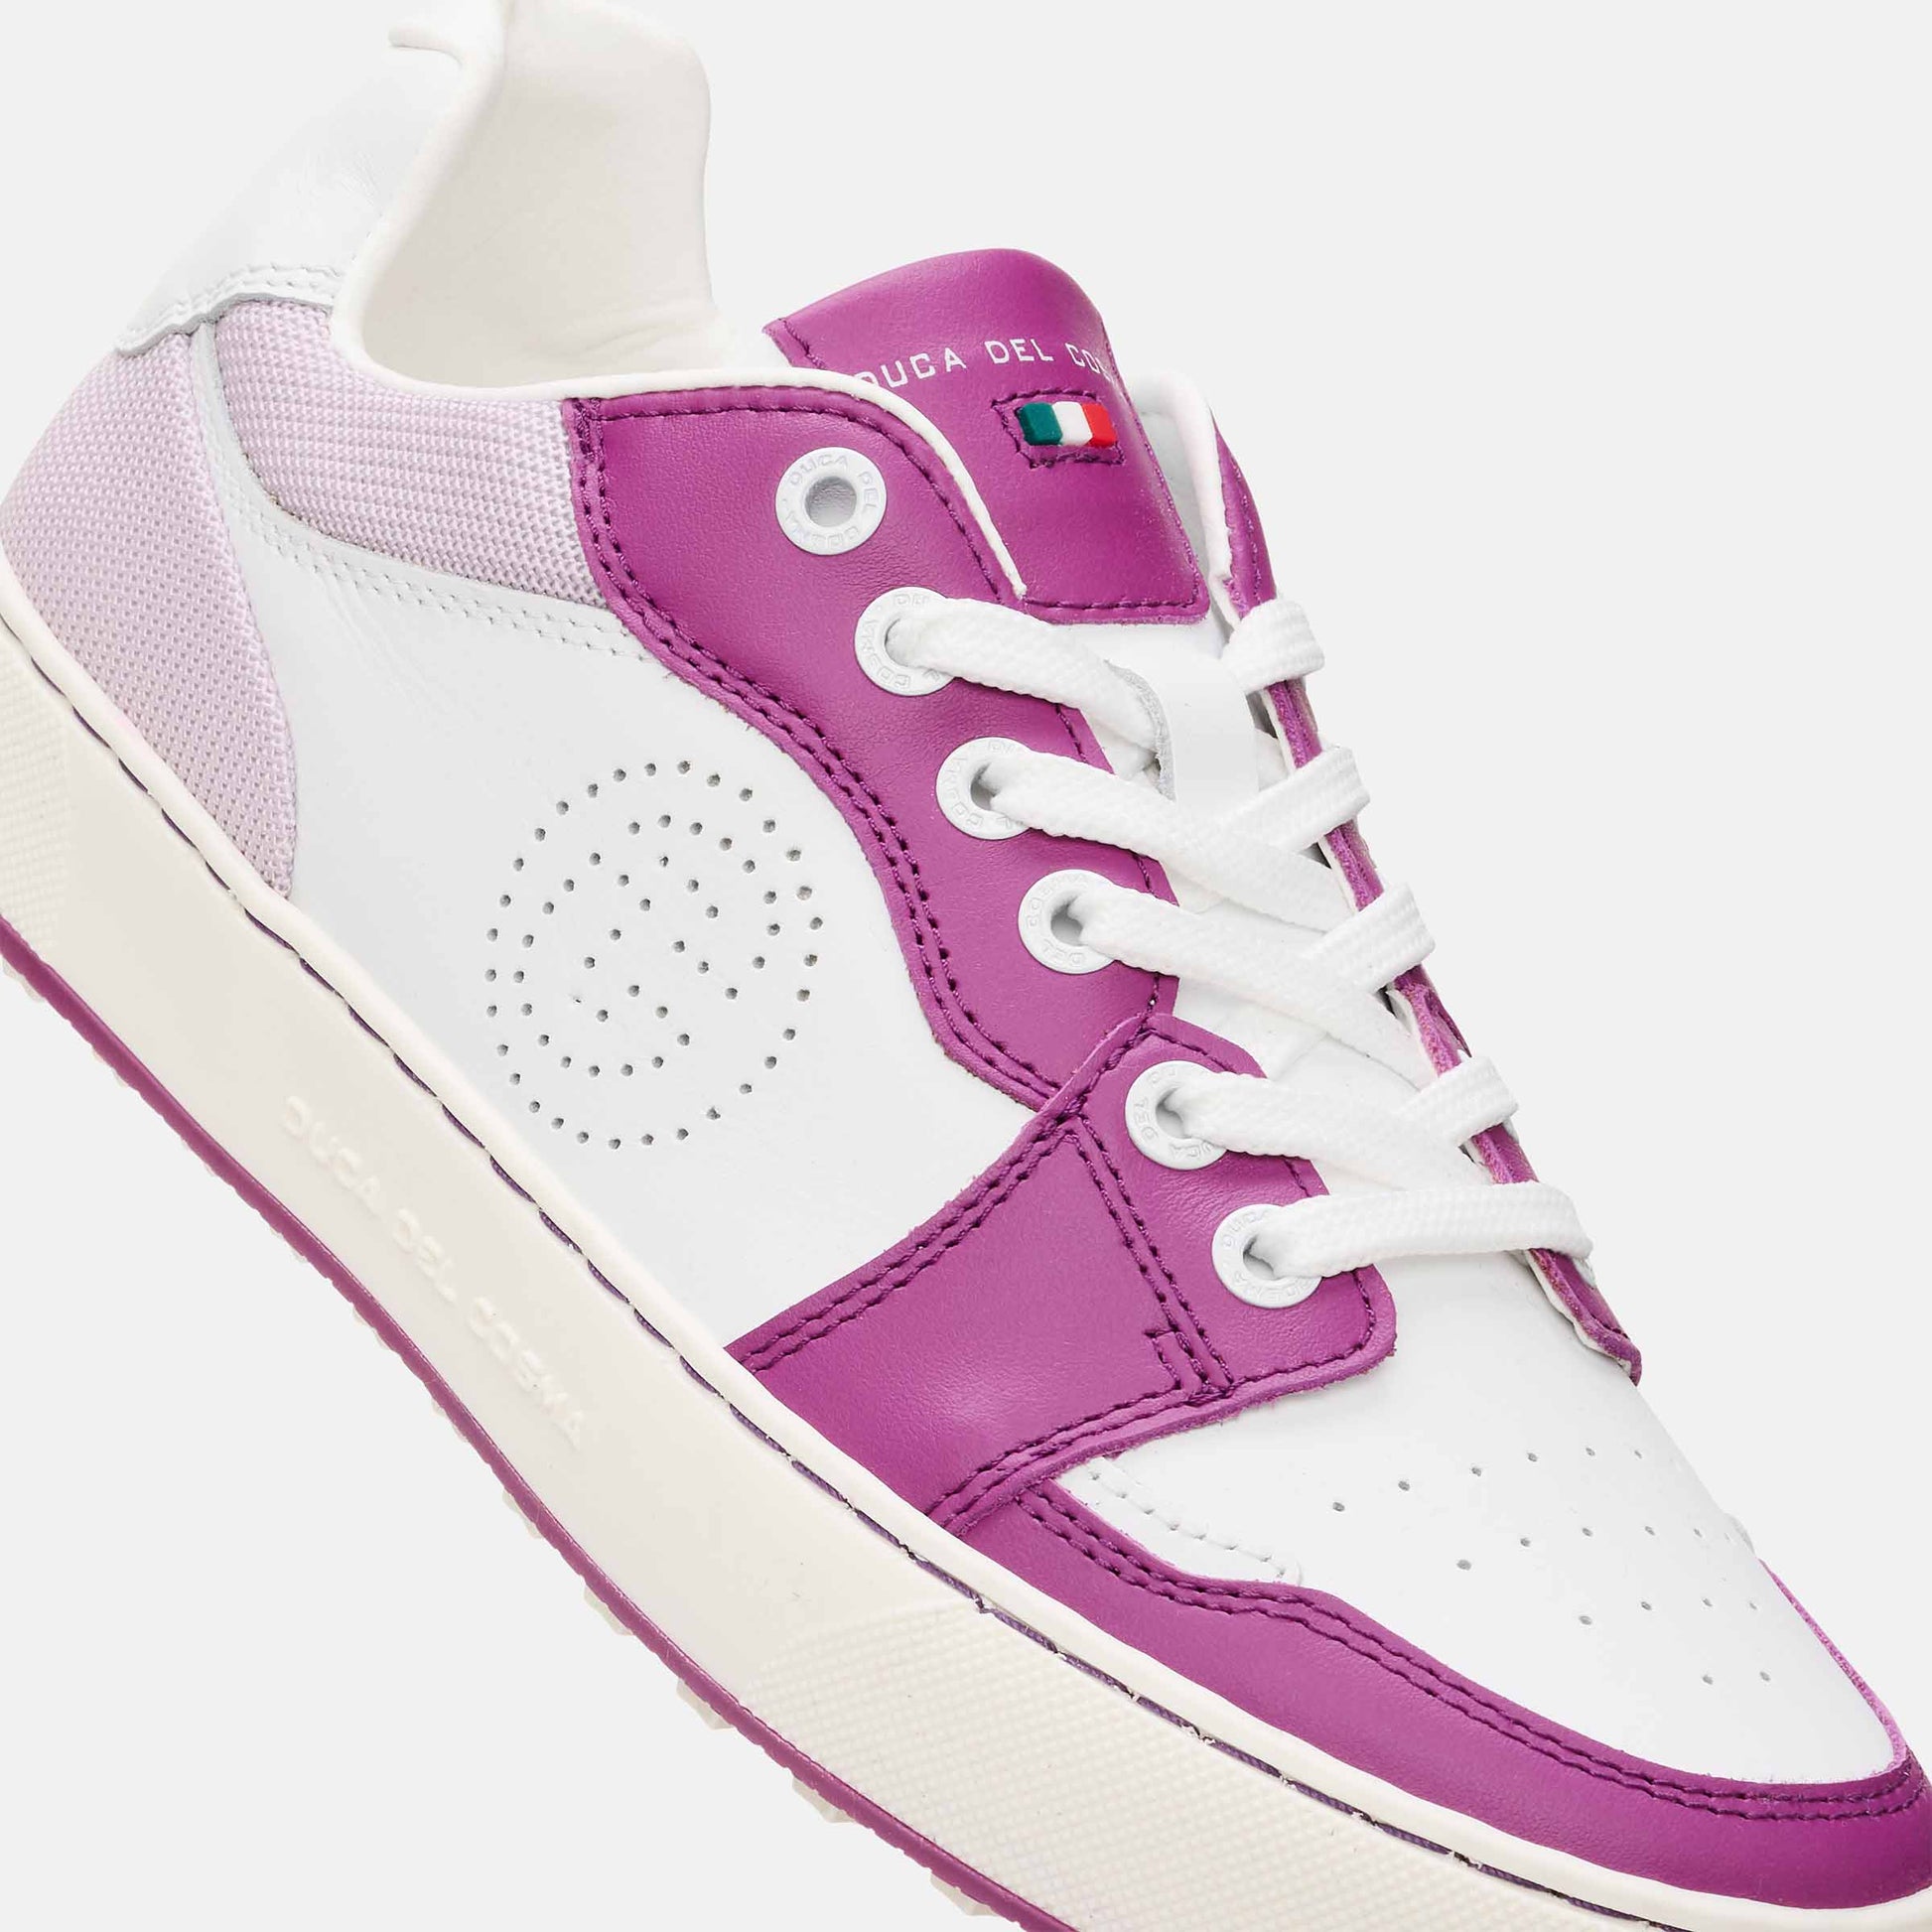 White Golf Shoes, Purple Golf Shoes, Spikeless Golf Shoes, Duca del Cosma Women's Golf Shoes, Sneaker golf shoes.